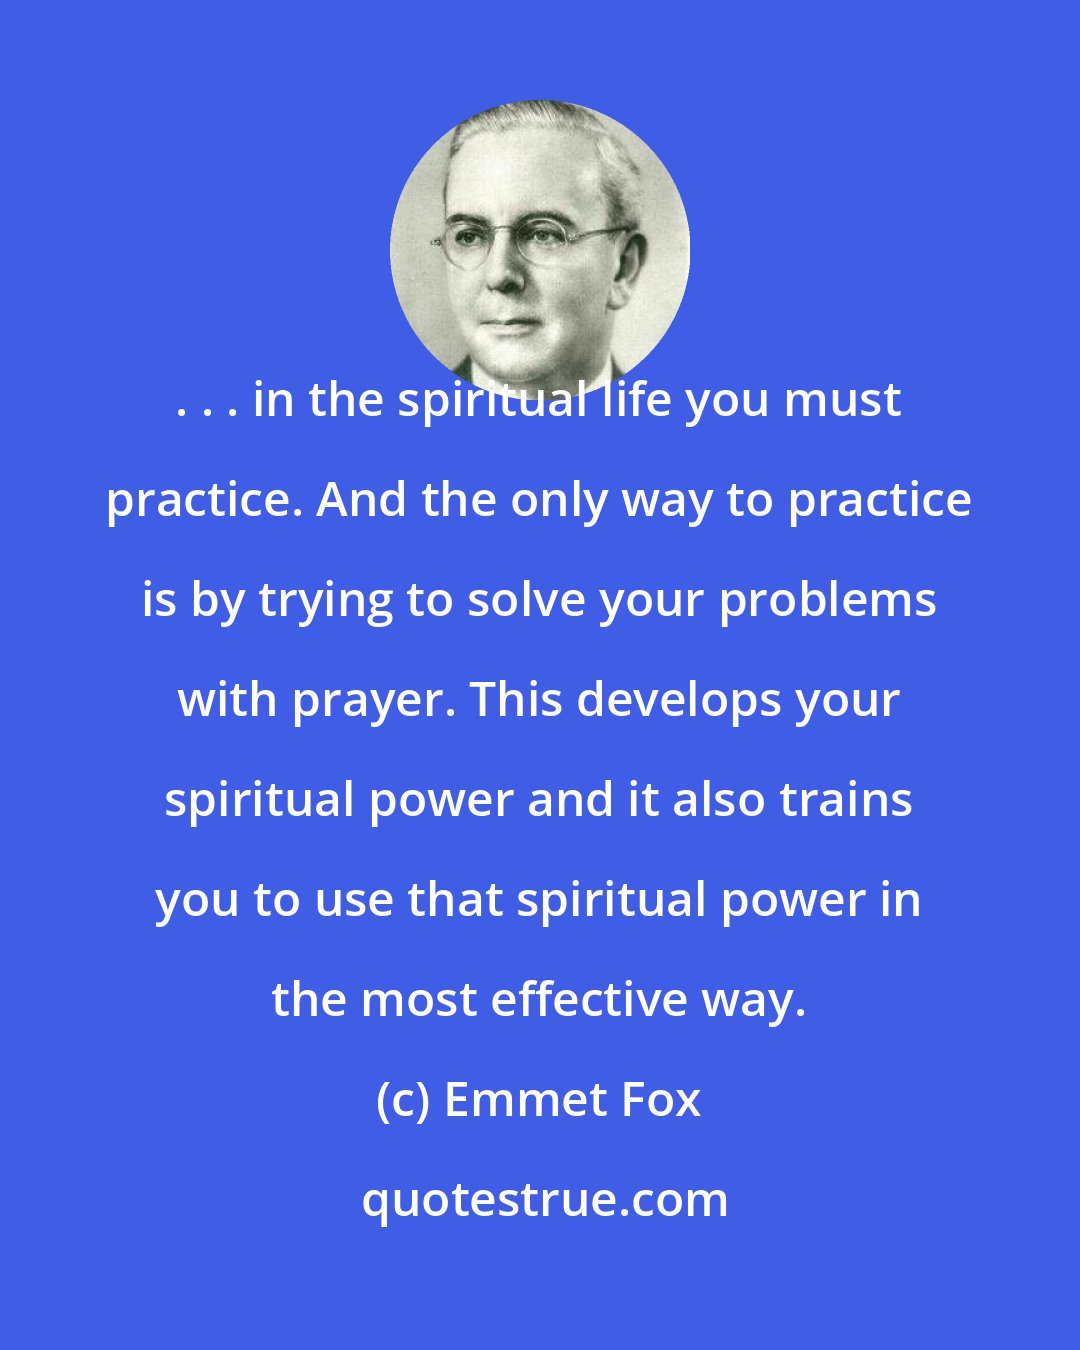 Emmet Fox: . . . in the spiritual life you must practice. And the only way to practice is by trying to solve your problems with prayer. This develops your spiritual power and it also trains you to use that spiritual power in the most effective way.